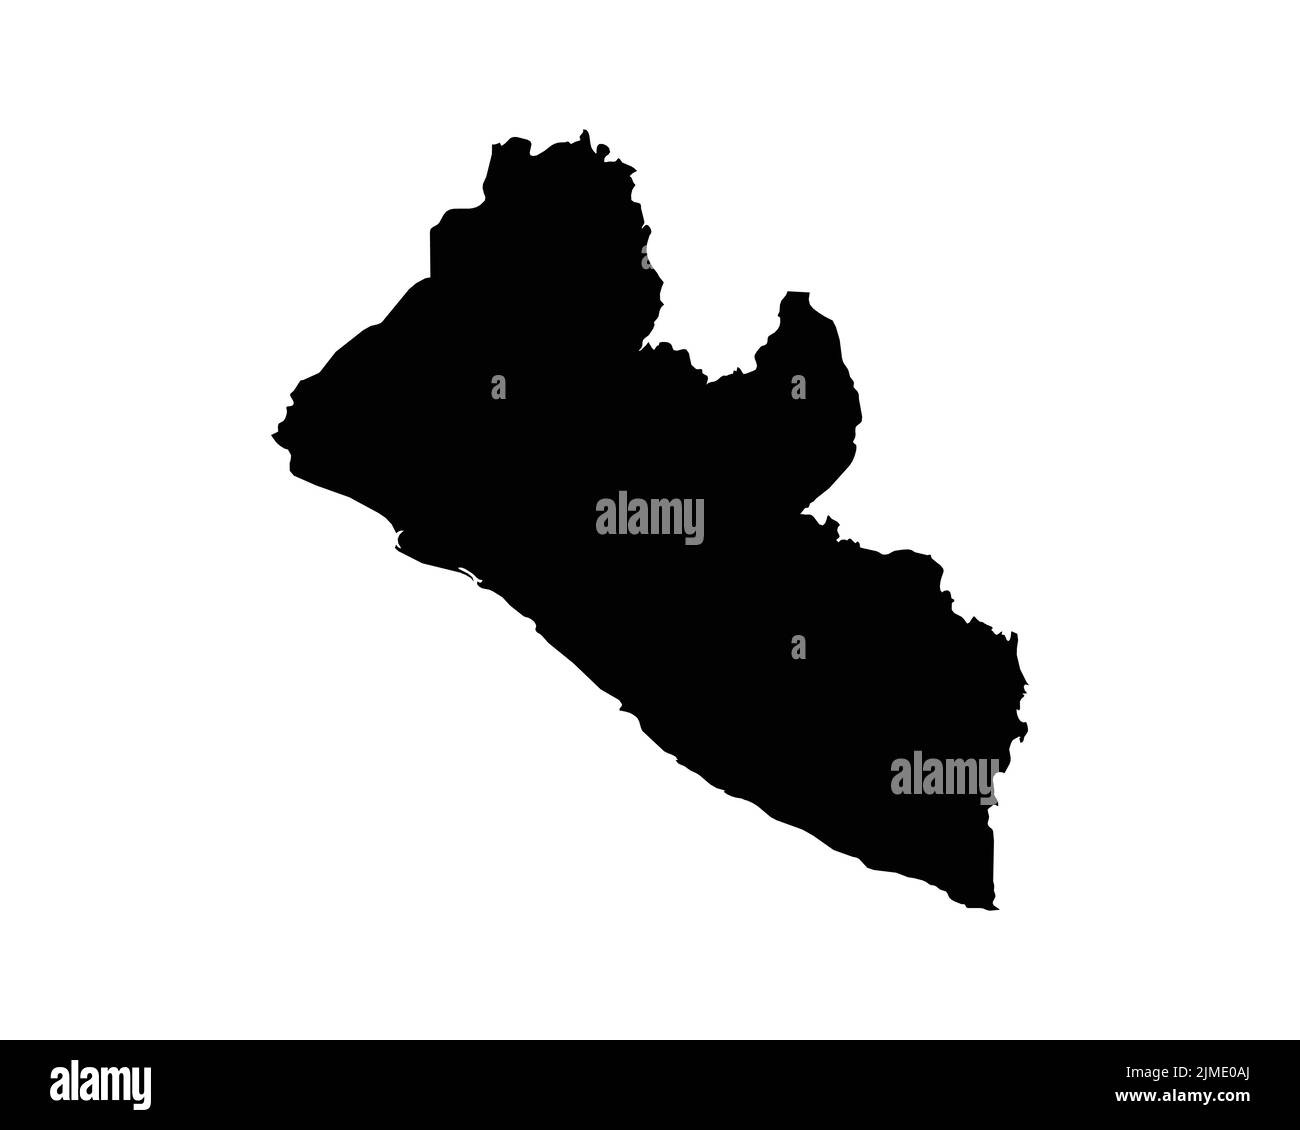 Liberia Map. Liberian Country Map. Black and White National Nation Outline Geography Border Boundary Shape Territory Vector Illustration EPS Clipart Stock Vector